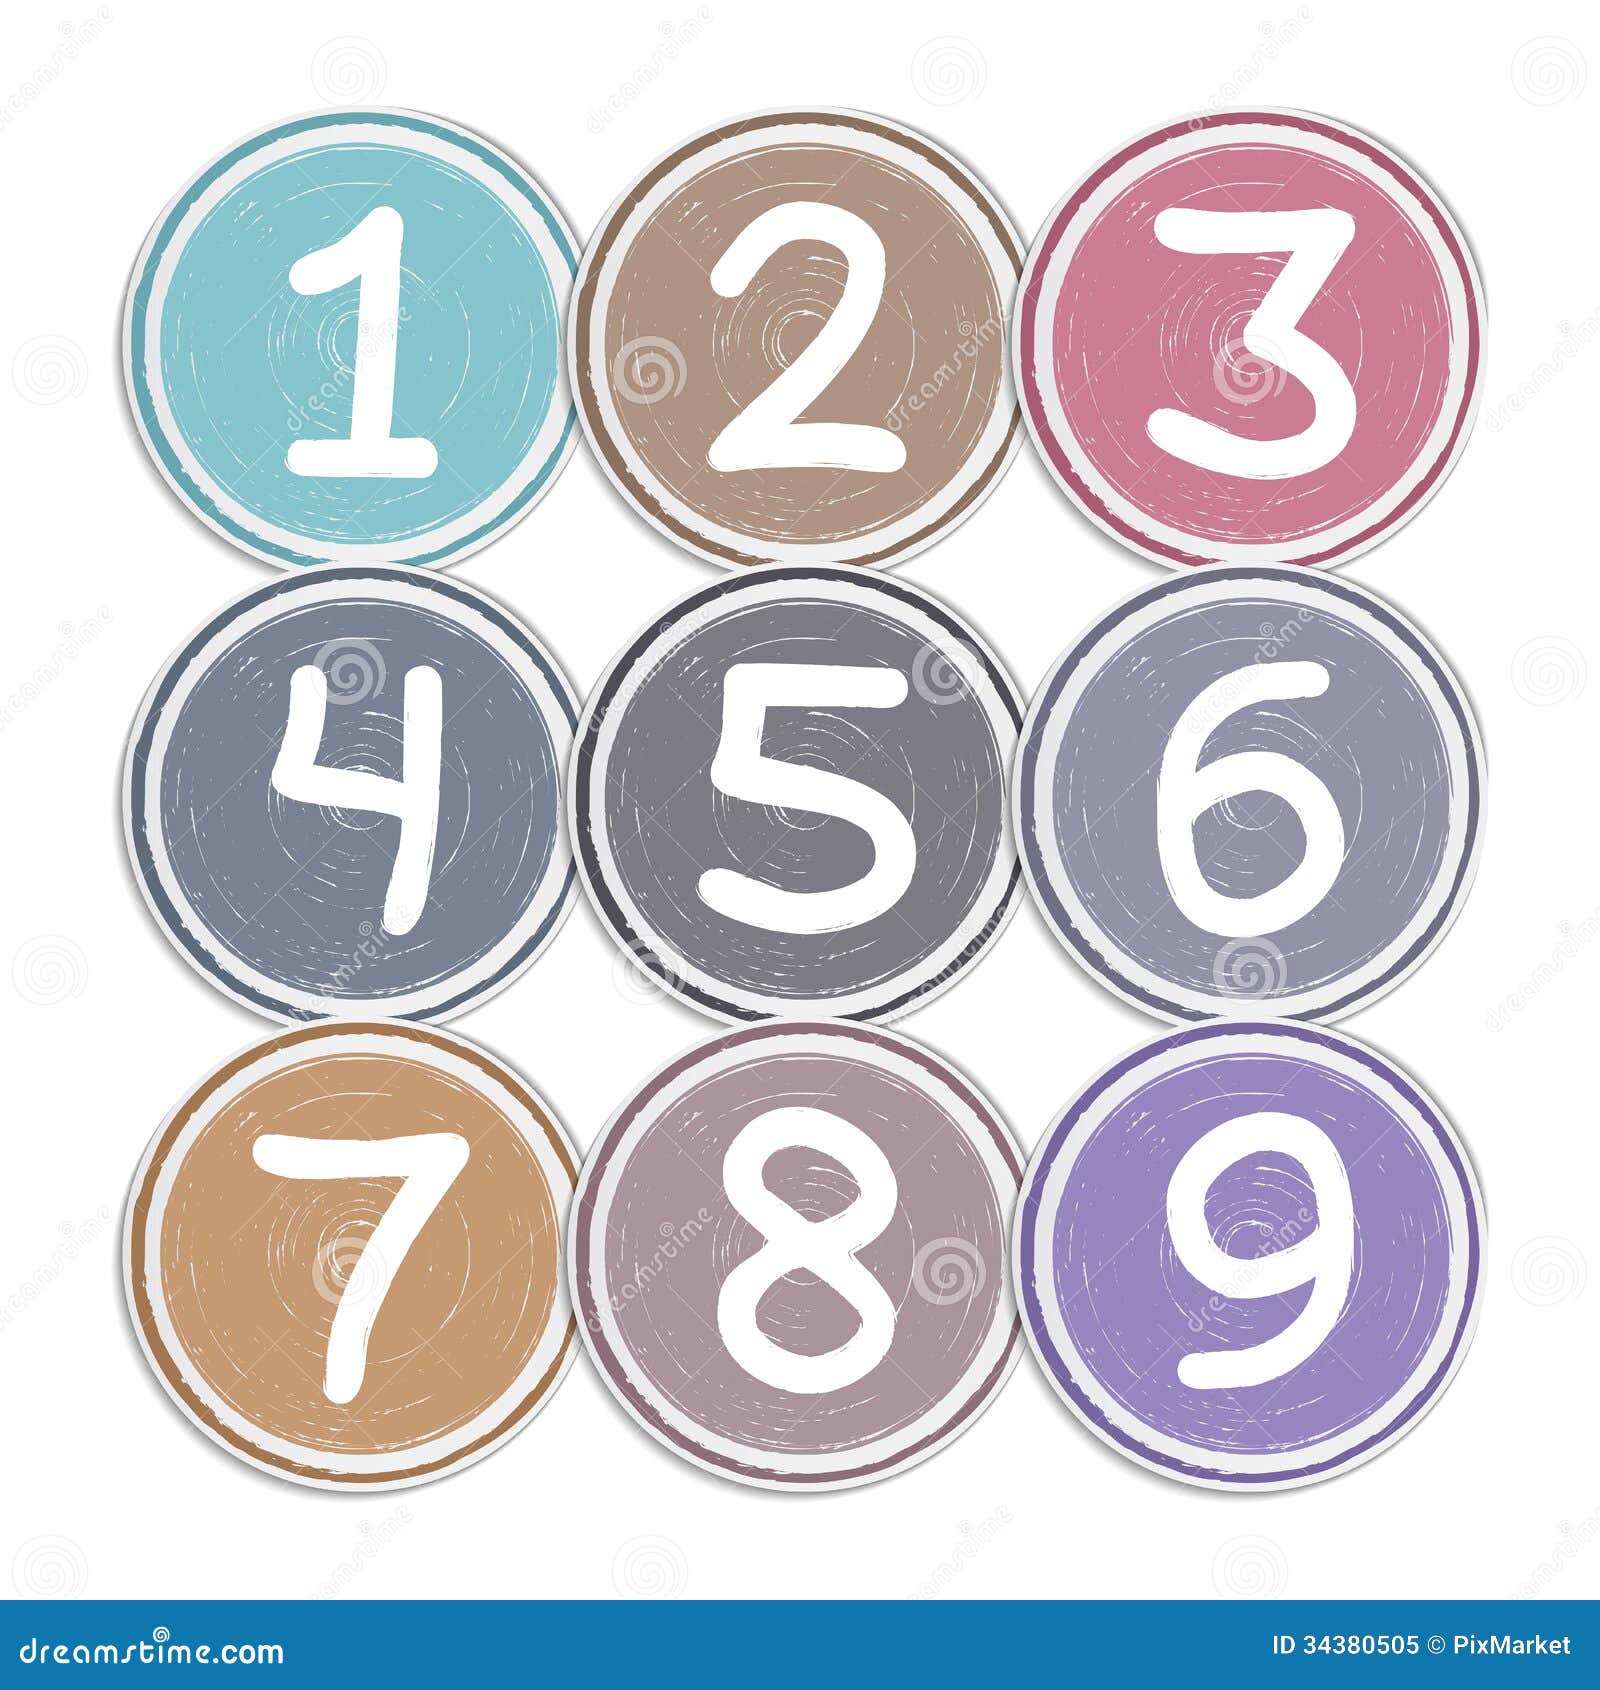 clipart numbers in circles - photo #26